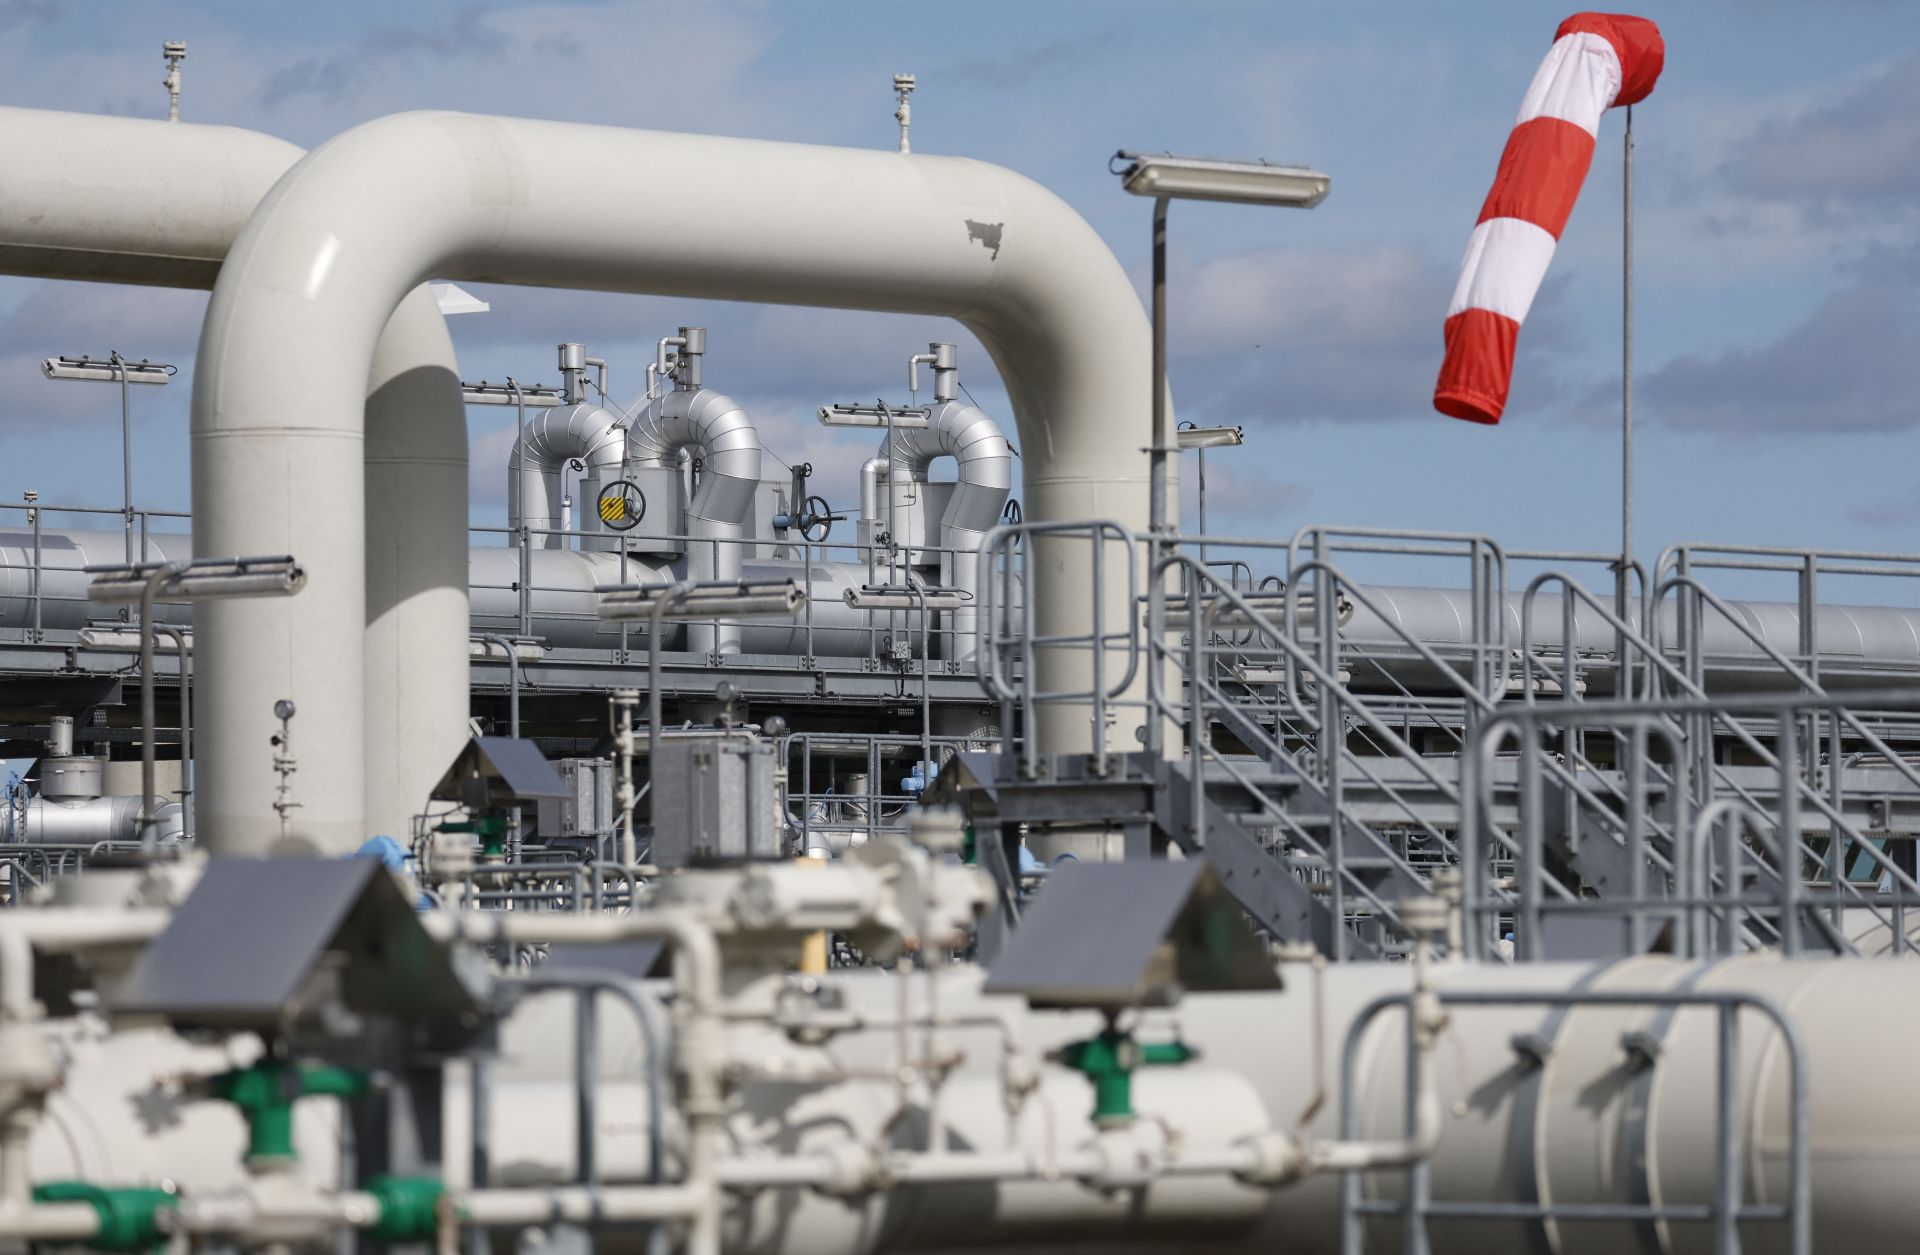 Facilities to receive and distribute natural gas are seen at a section of the Nord Stream 1 pipeline in Lubmin, northeastern Germany, on Aug. 30, 2022. 